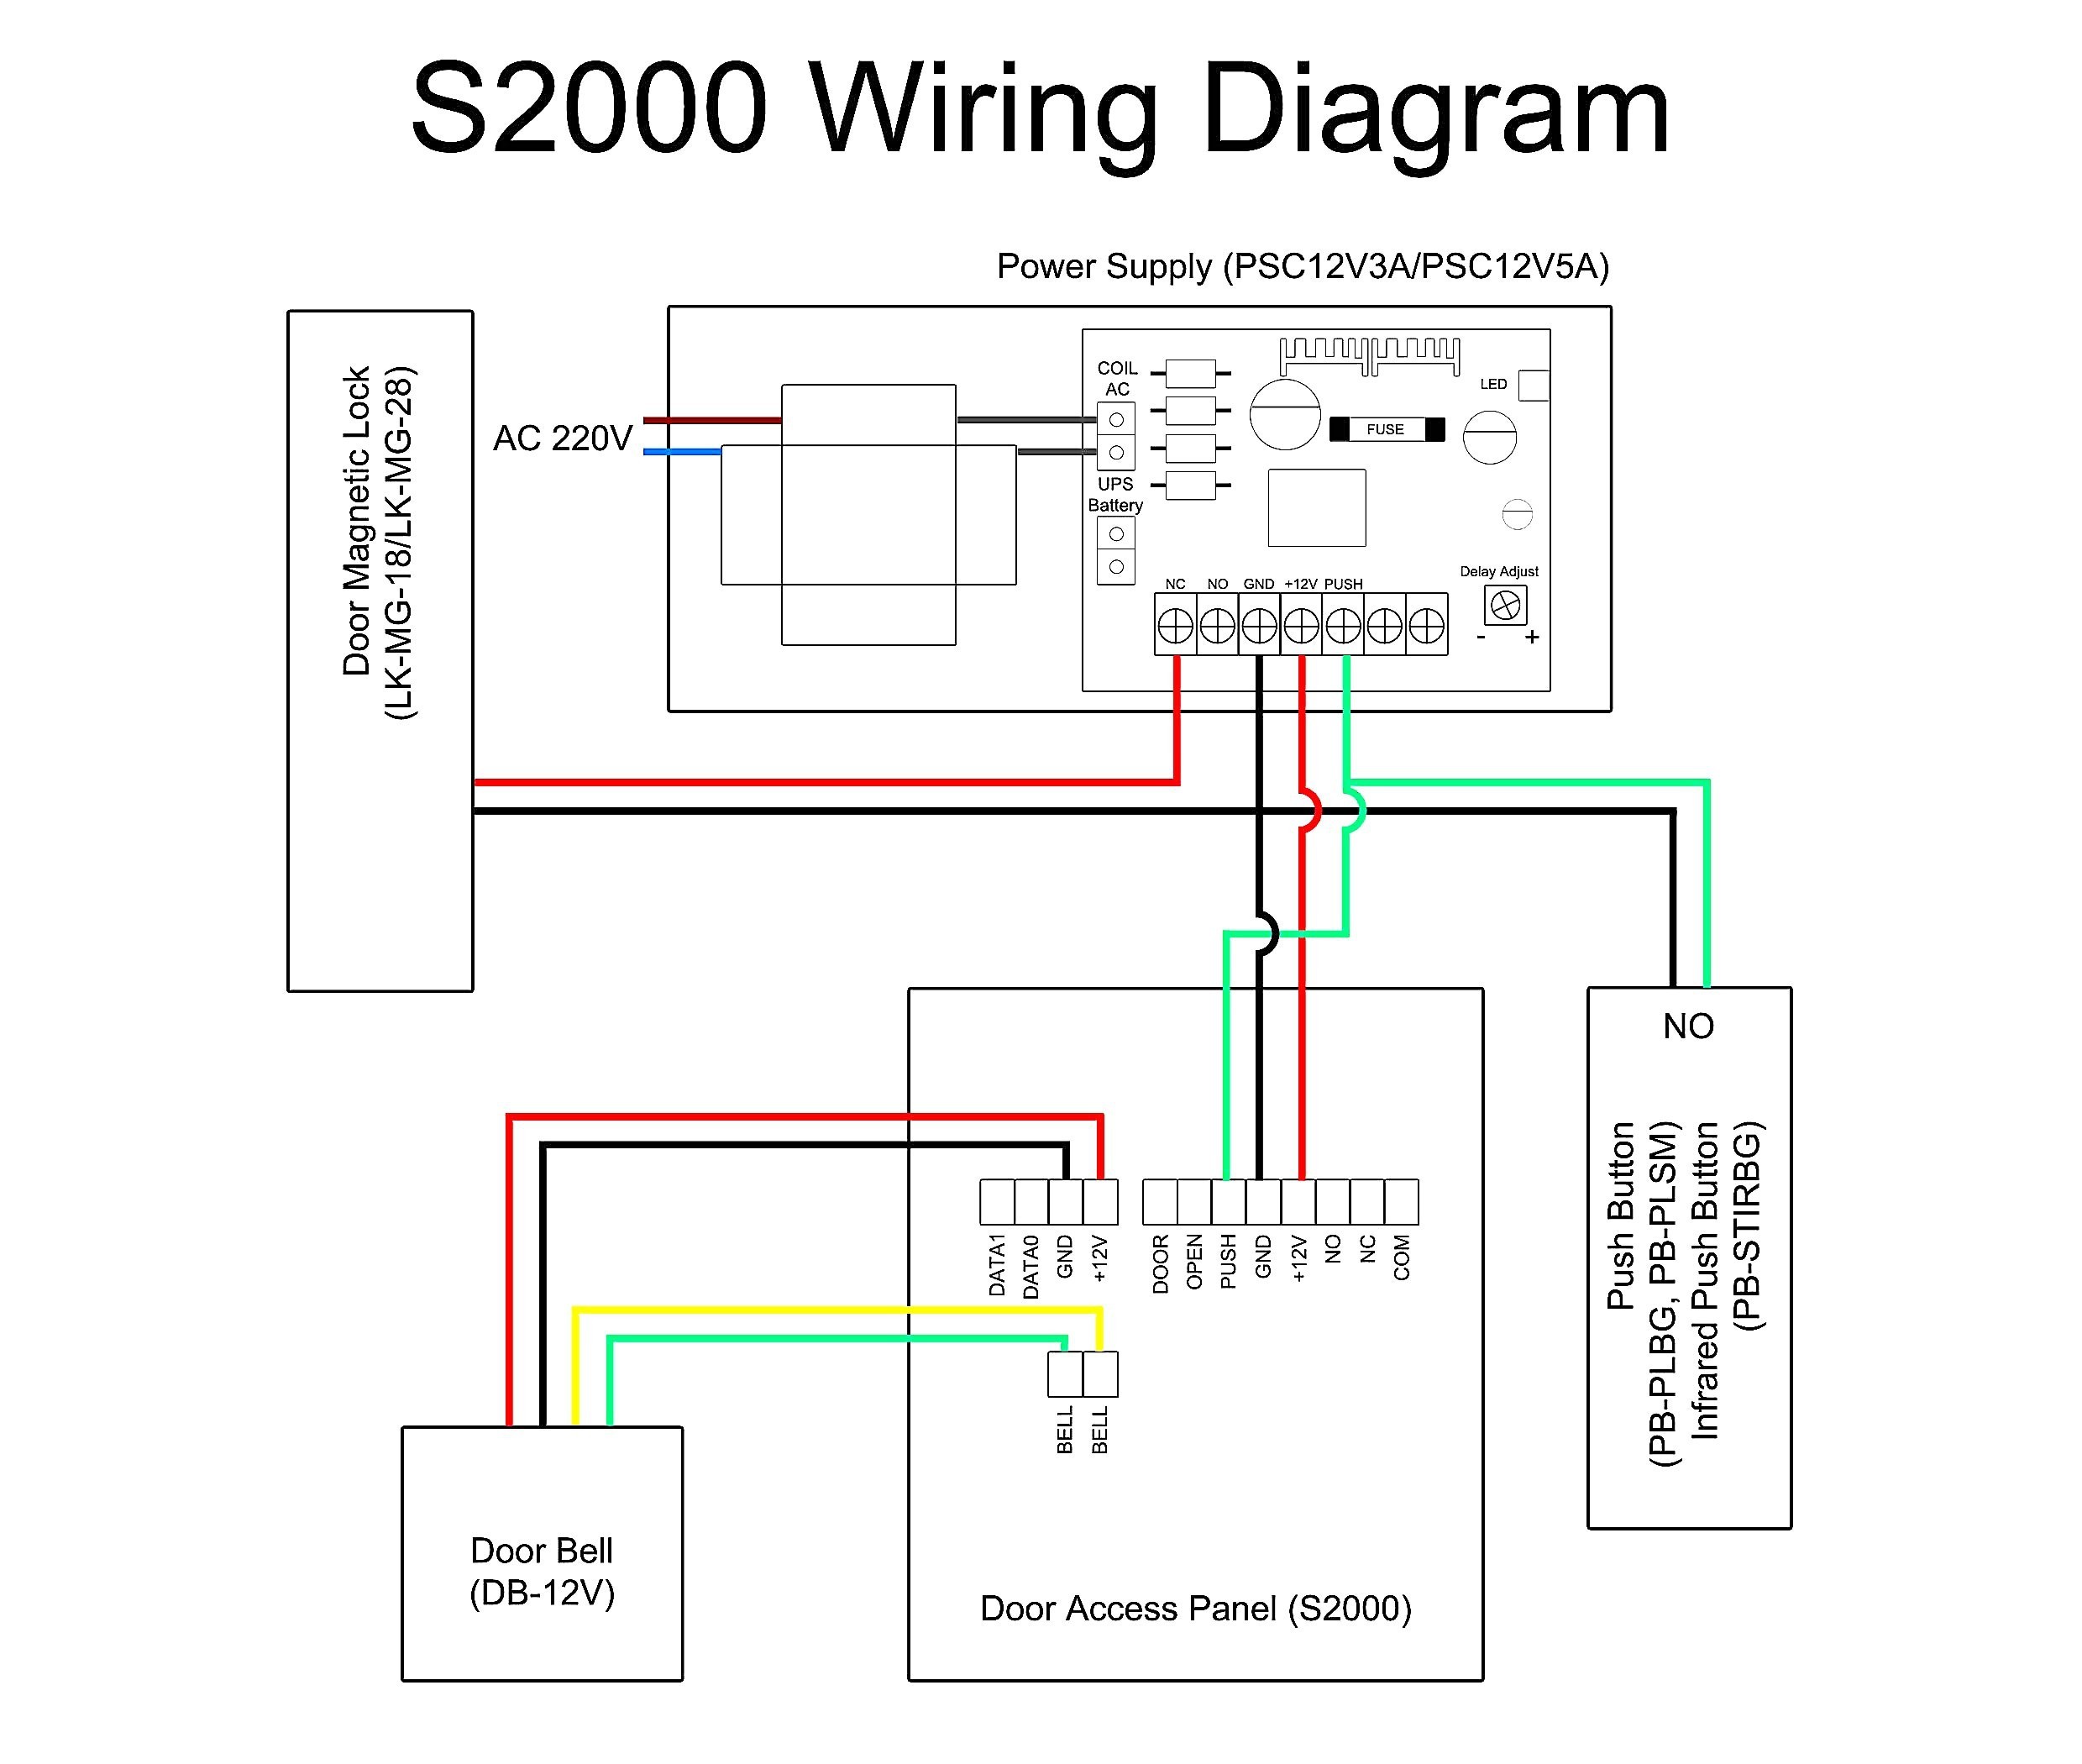 Came cell Wiring Diagram New Security Camera Wiring Diagram Delightful Appearance Cctv Block